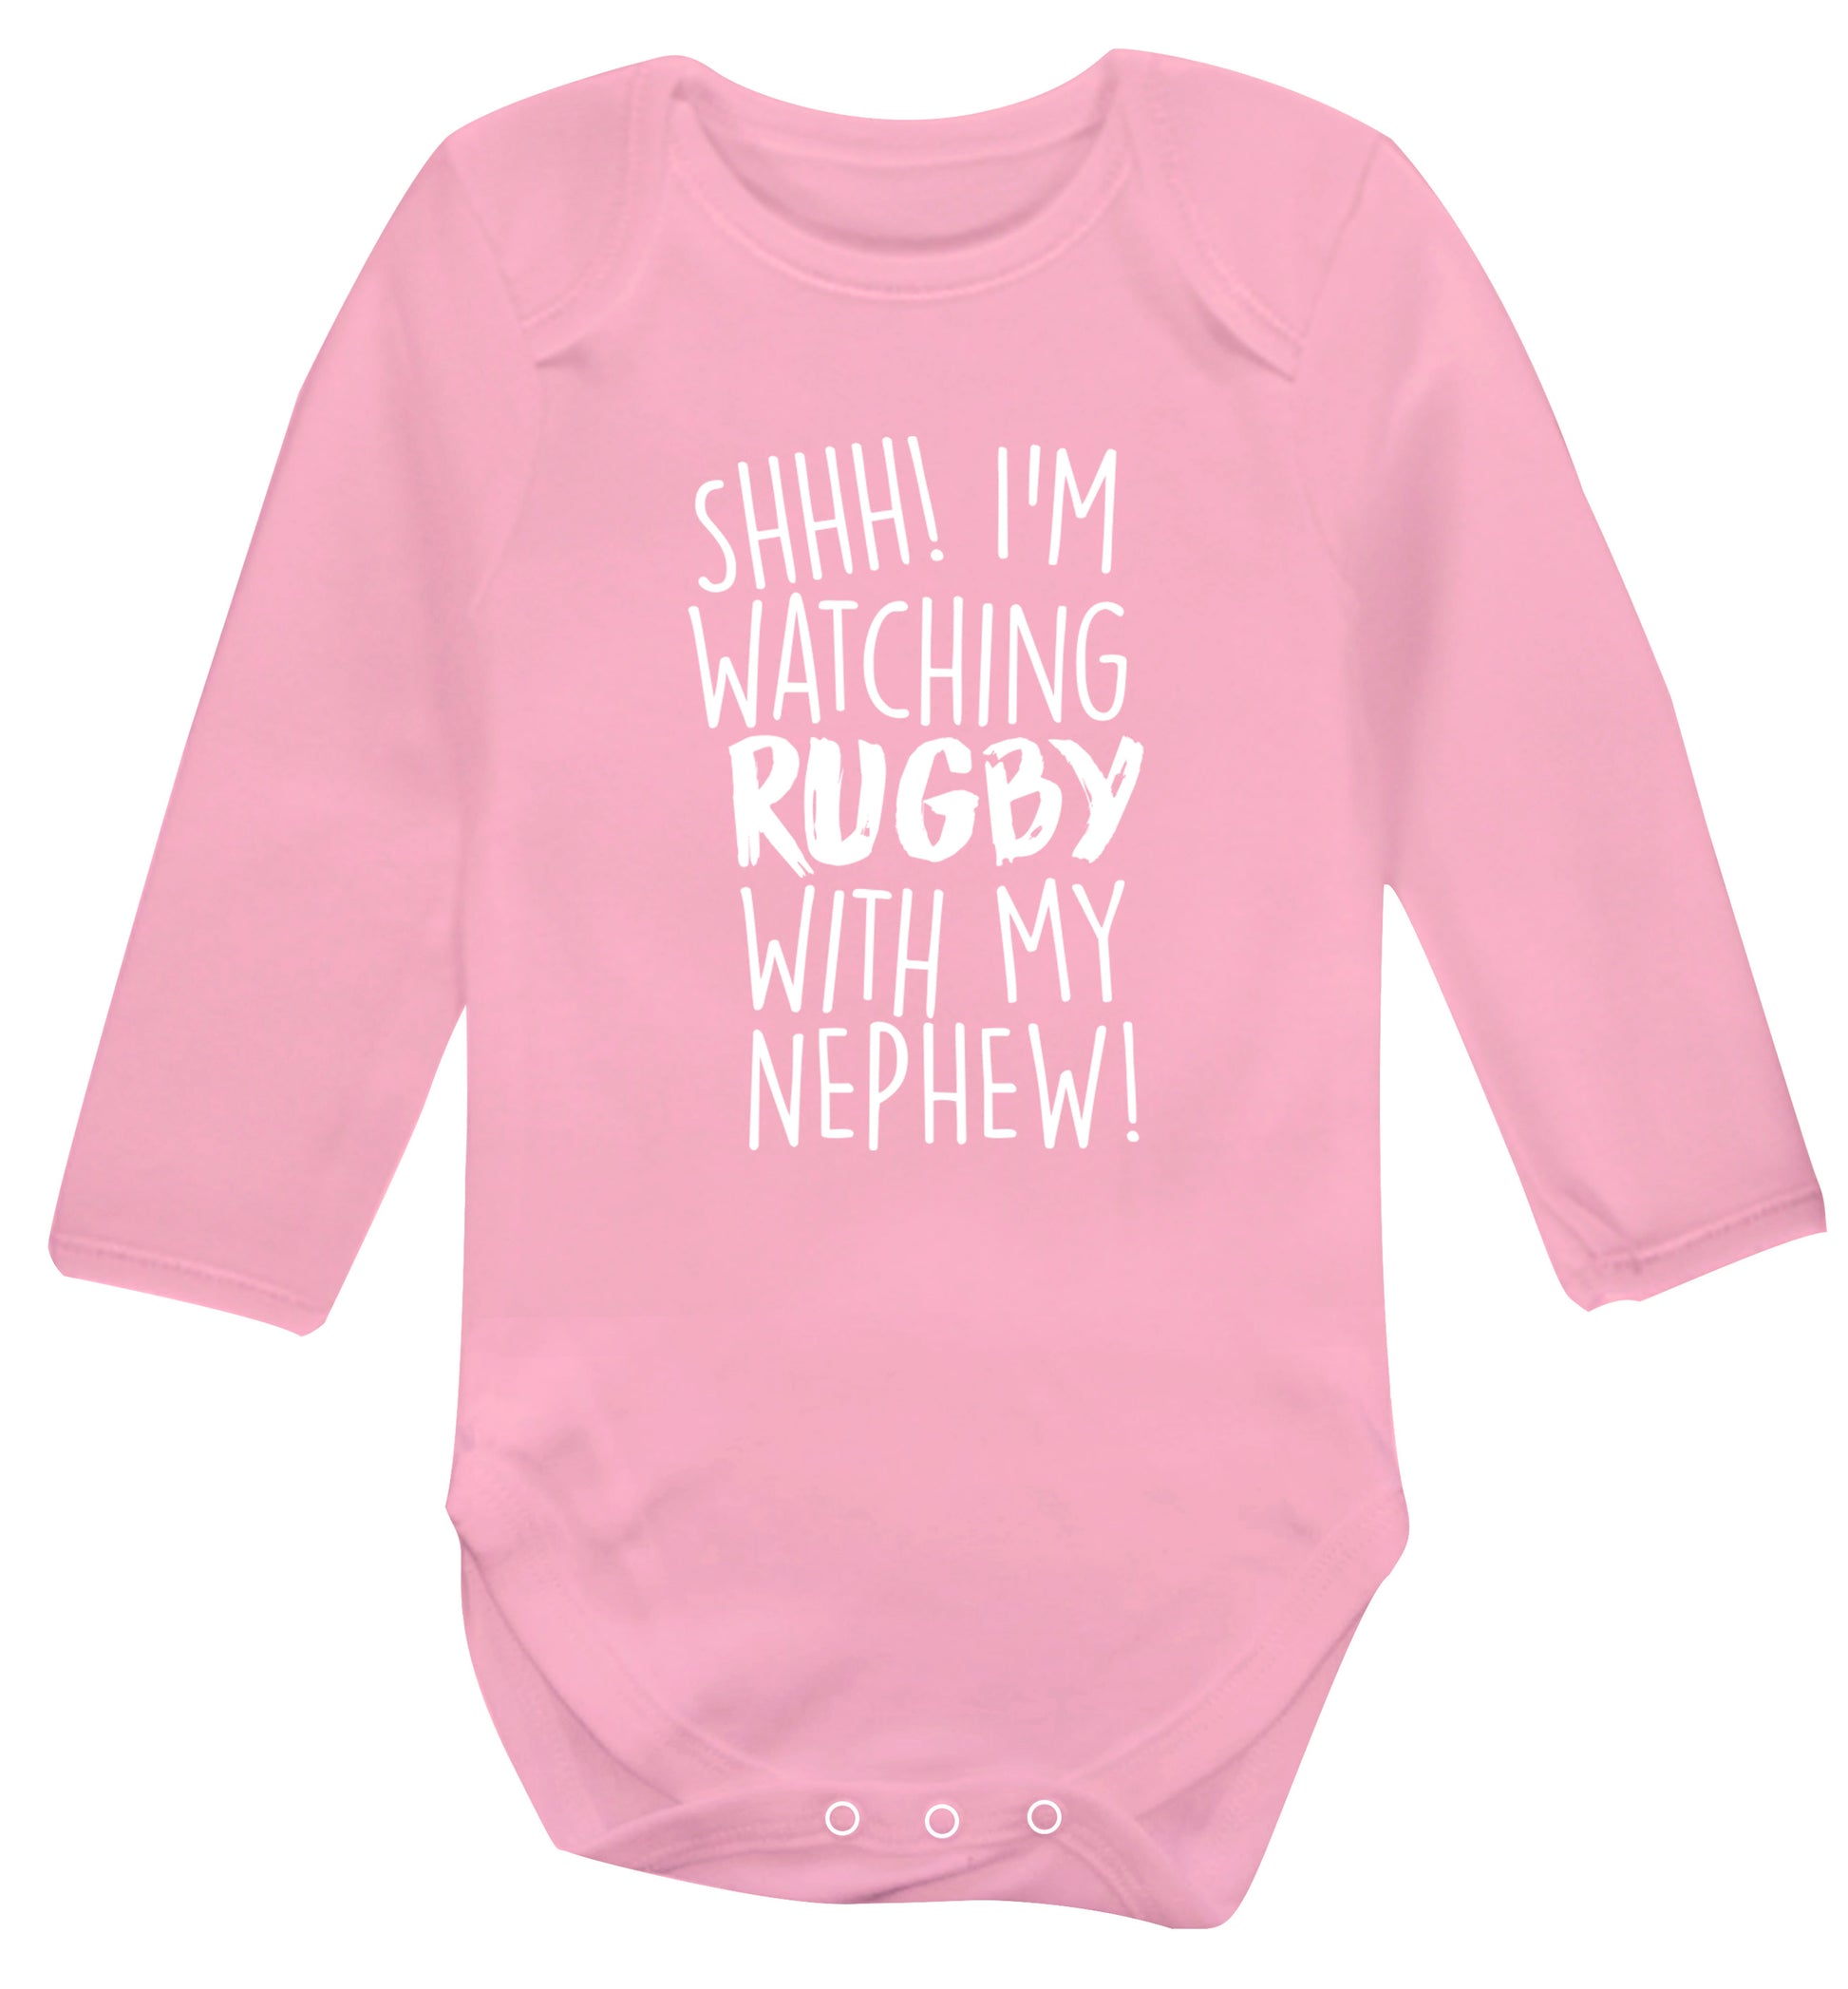 Shh.. I'm watching rugby with my nephew Baby Vest long sleeved pale pink 6-12 months